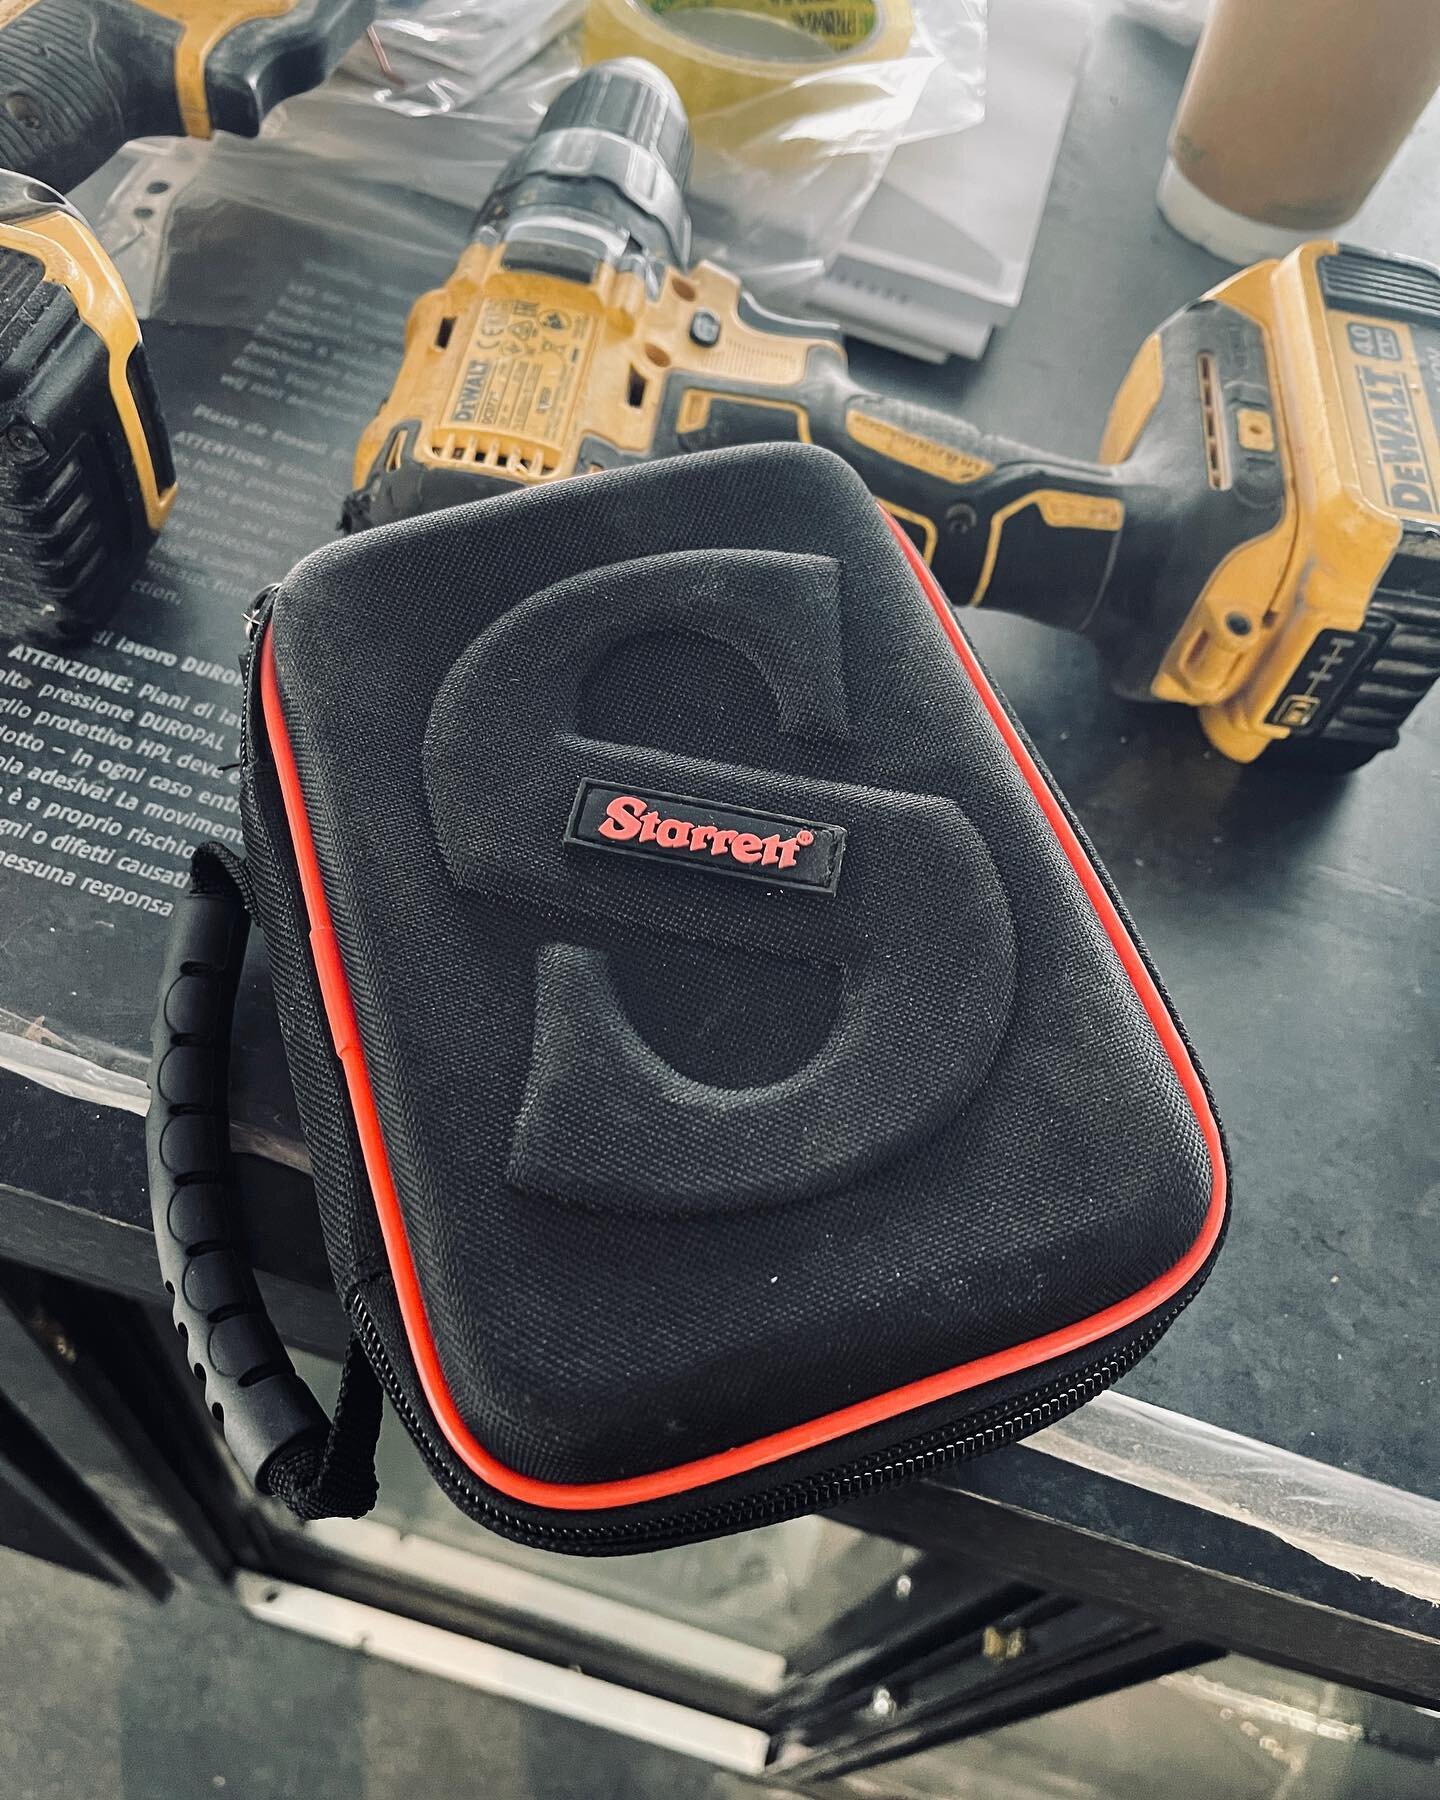 Loving these @starrett_uk cutters
Super sharp and clean cuts every time!
Also fit in my tool bag in this nice little pouch for quick access if needed 👌🏼
.
.
#starrett #diycraft #electrician #electricallife #sparks #electricalwiring #toolsofthetrade